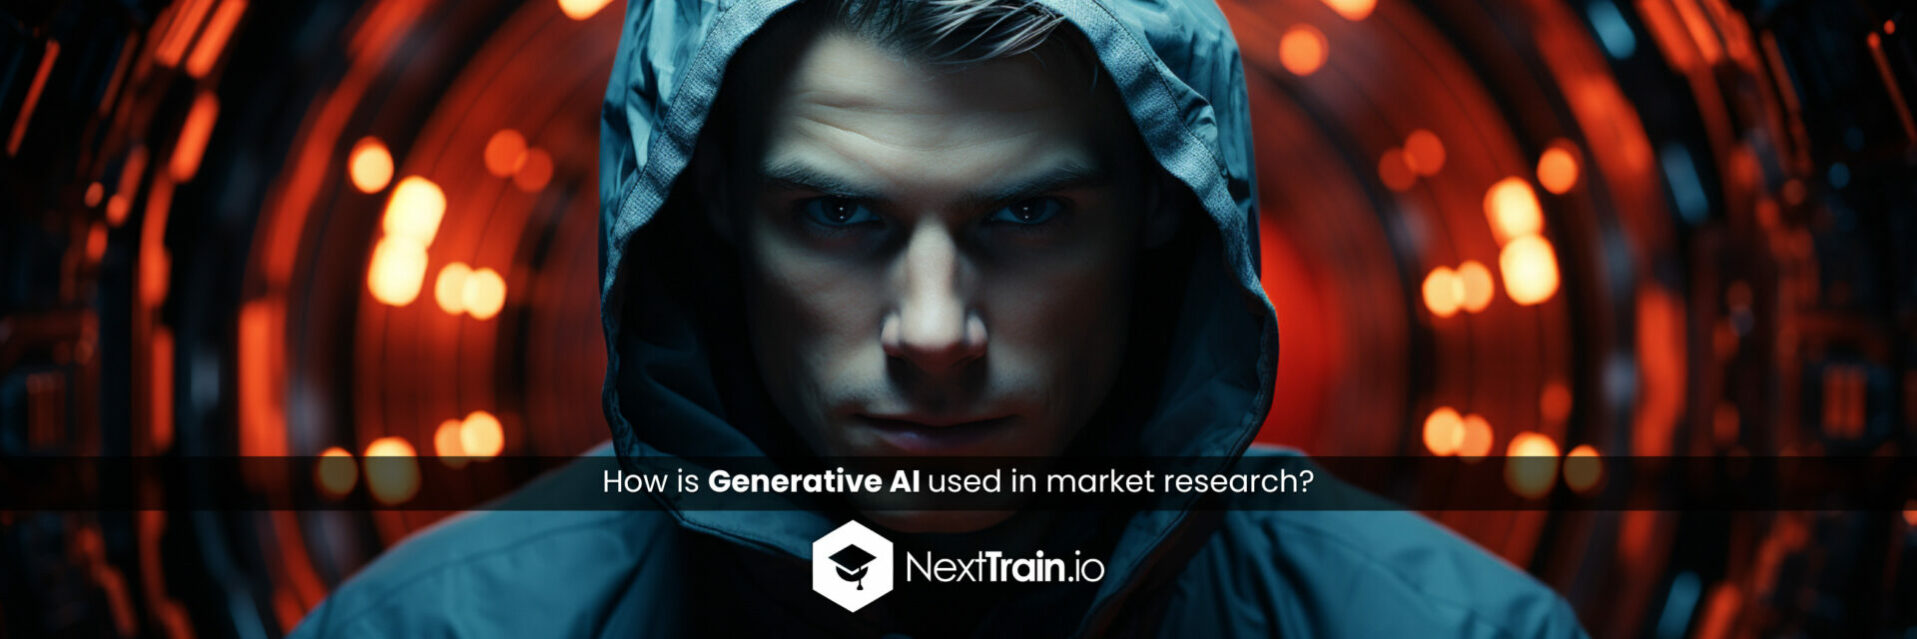 How is Generative AI used in market research?